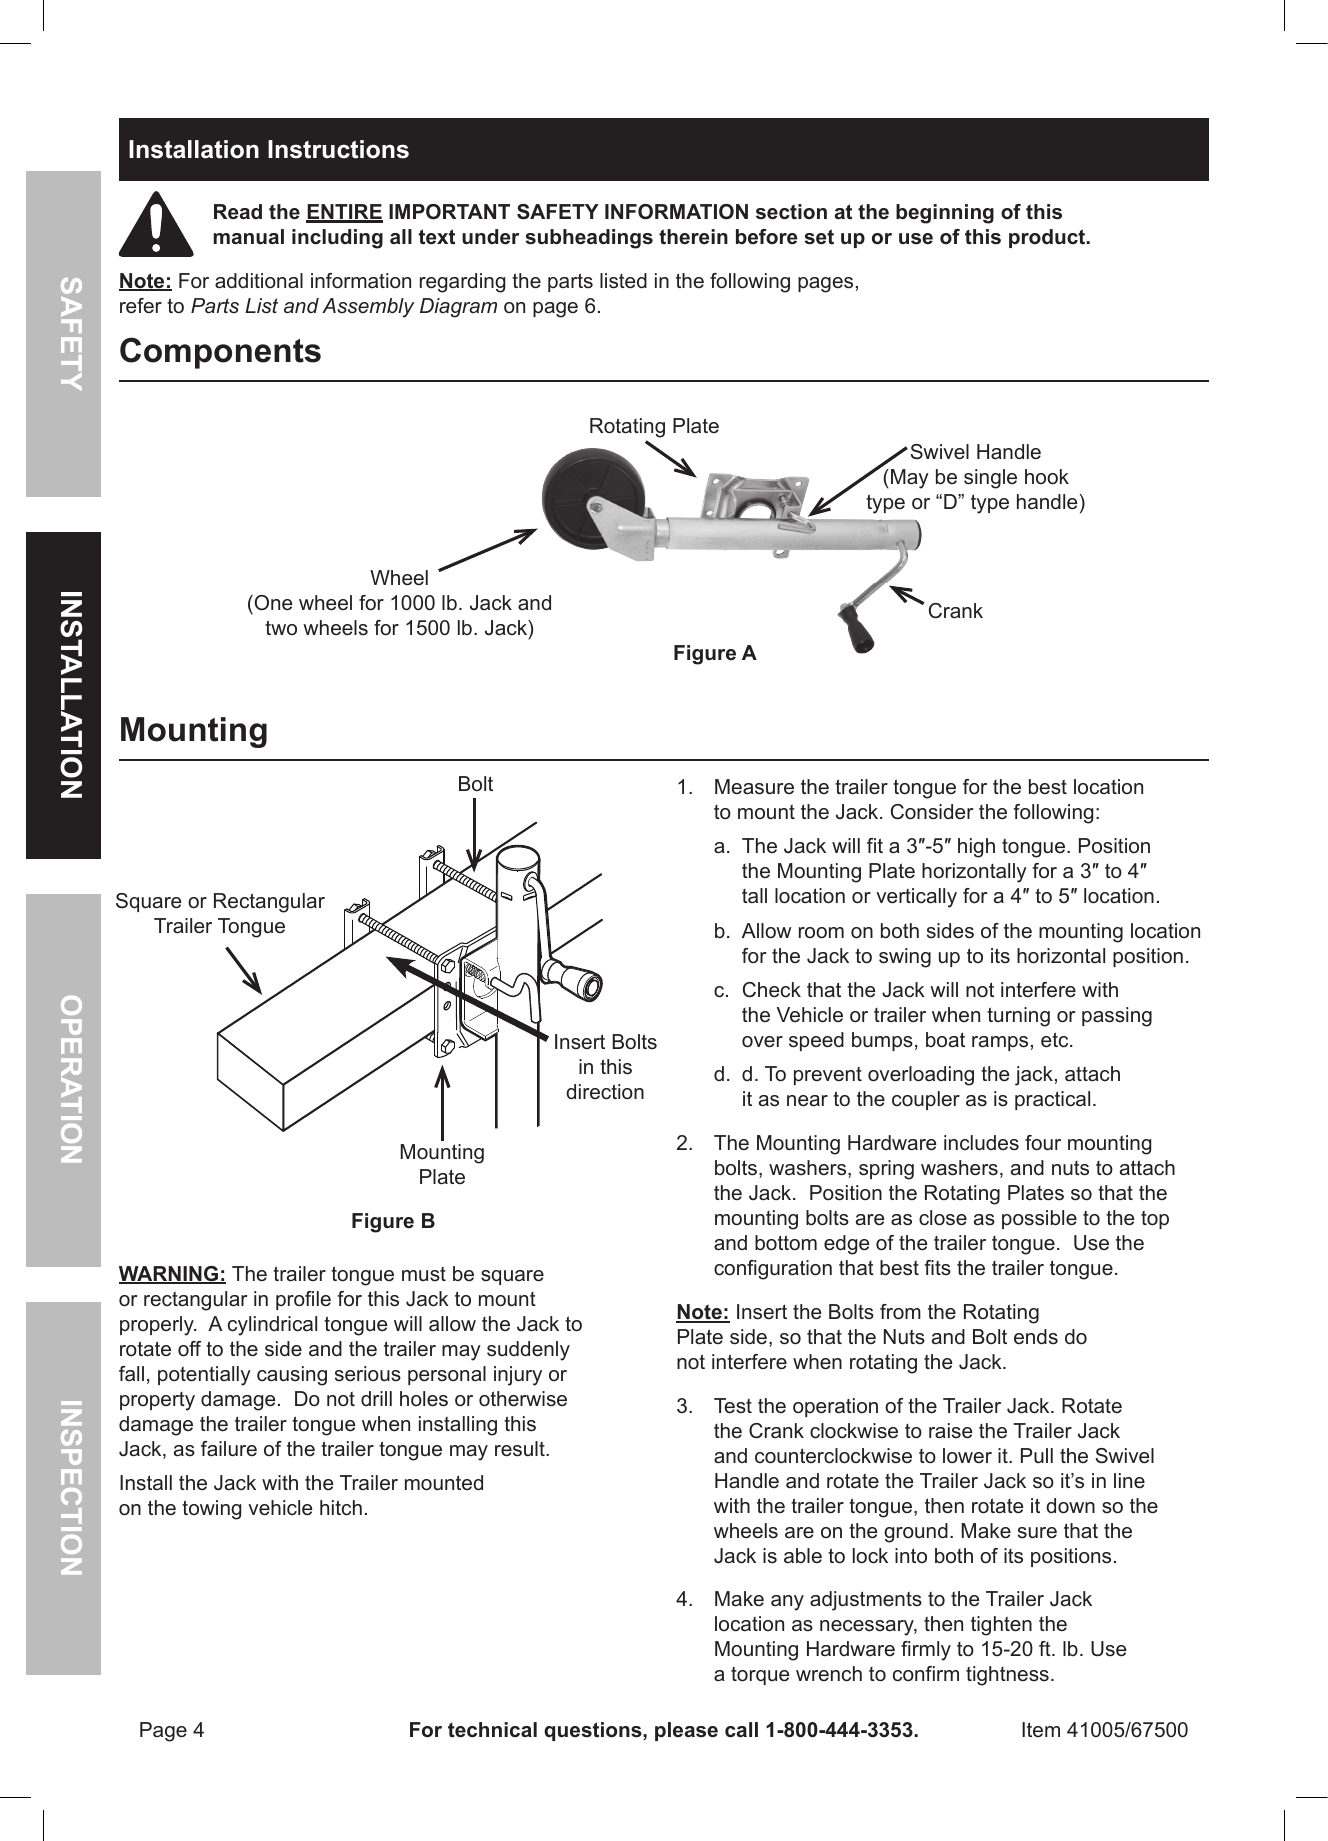 Page 4 of 8 - Harbor-Freight Harbor-Freight-1000-Lb-Capacity-Swing-Back-Trailer-Jack-Product-Manual-  Harbor-freight-1000-lb-capacity-swing-back-trailer-jack-product-manual